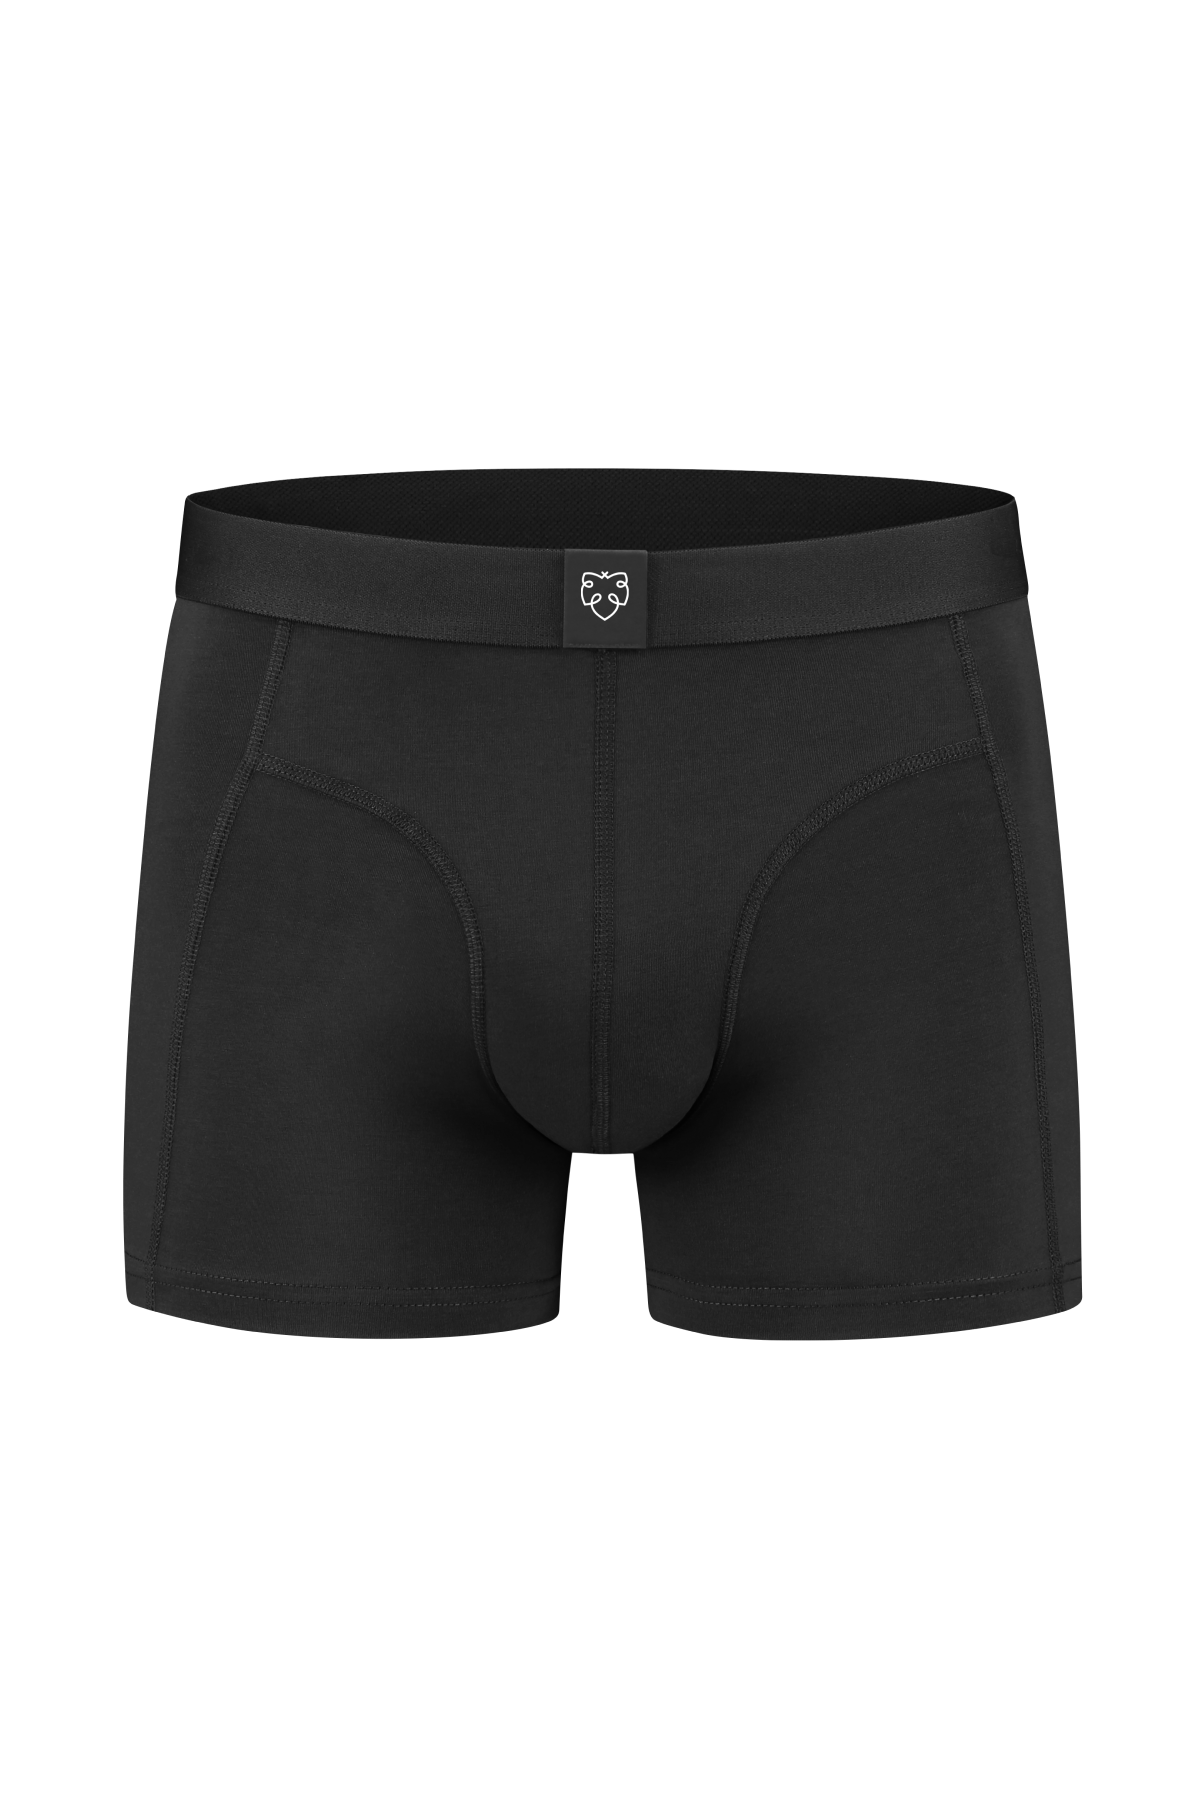 A-dam solid black boxer briefs from GOTS organic cotton